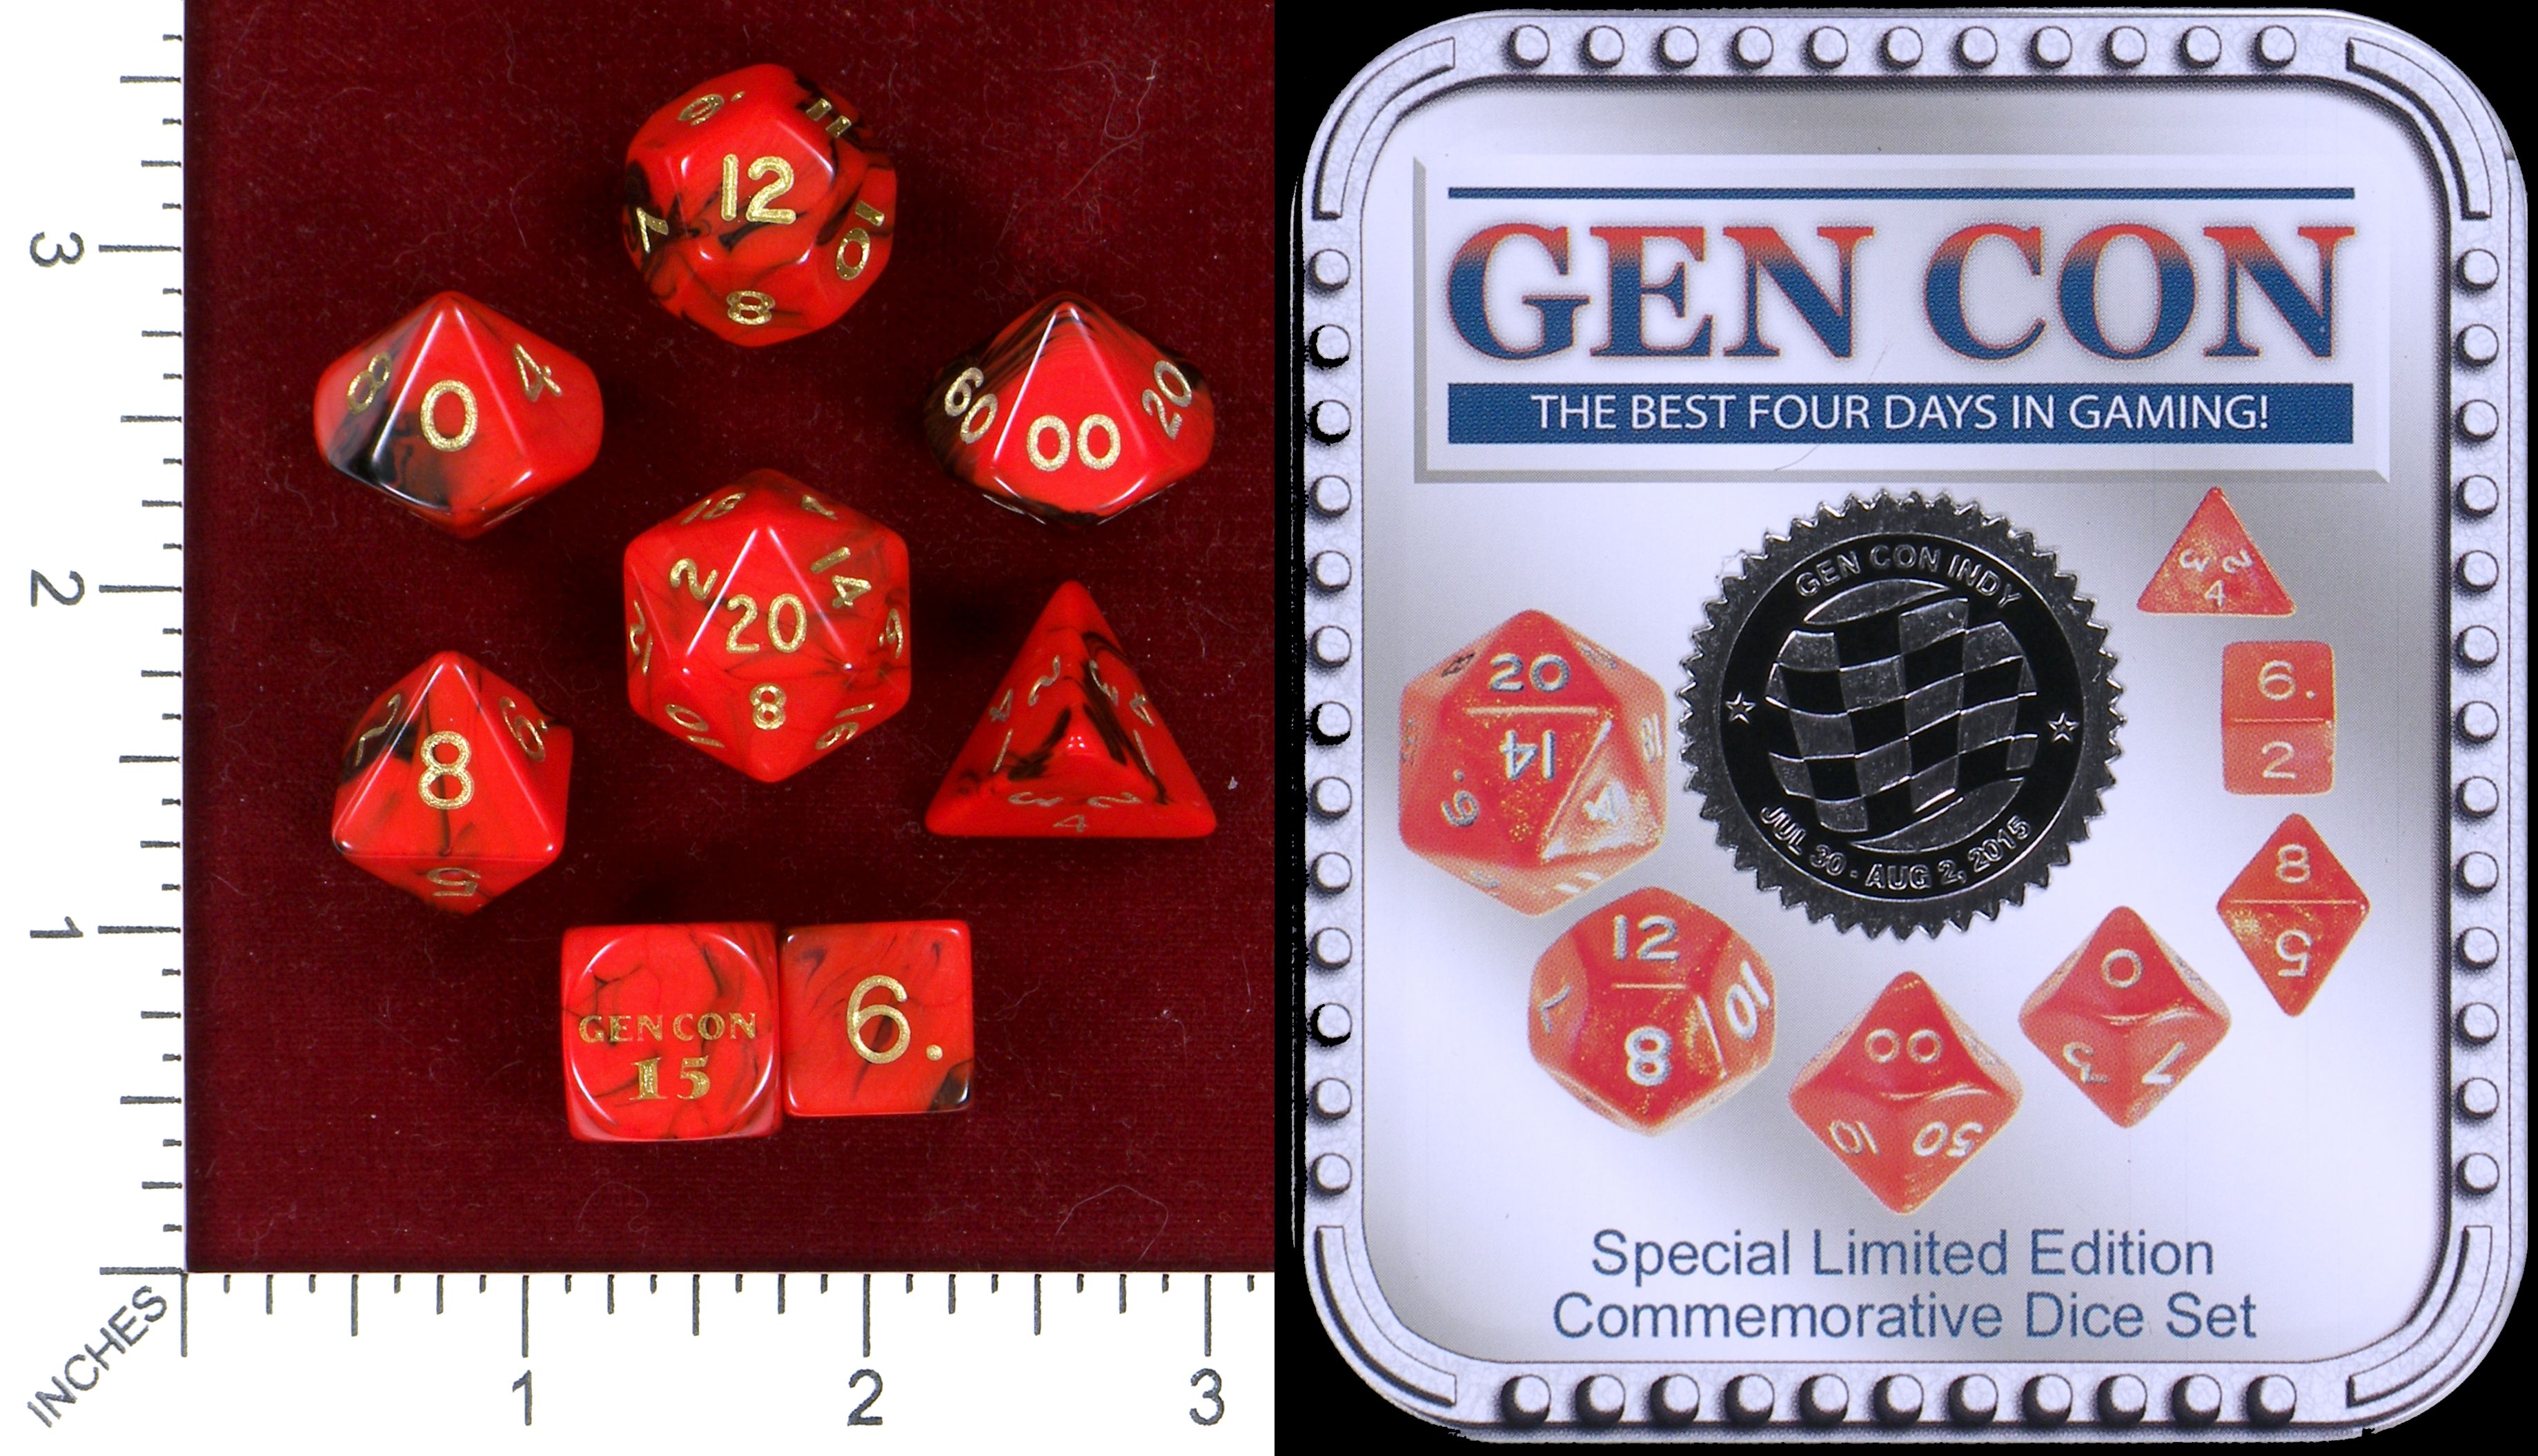 *** Gen Con 2020 Limited Edition Dice Set Crystal Caste Logo with D6 *** 